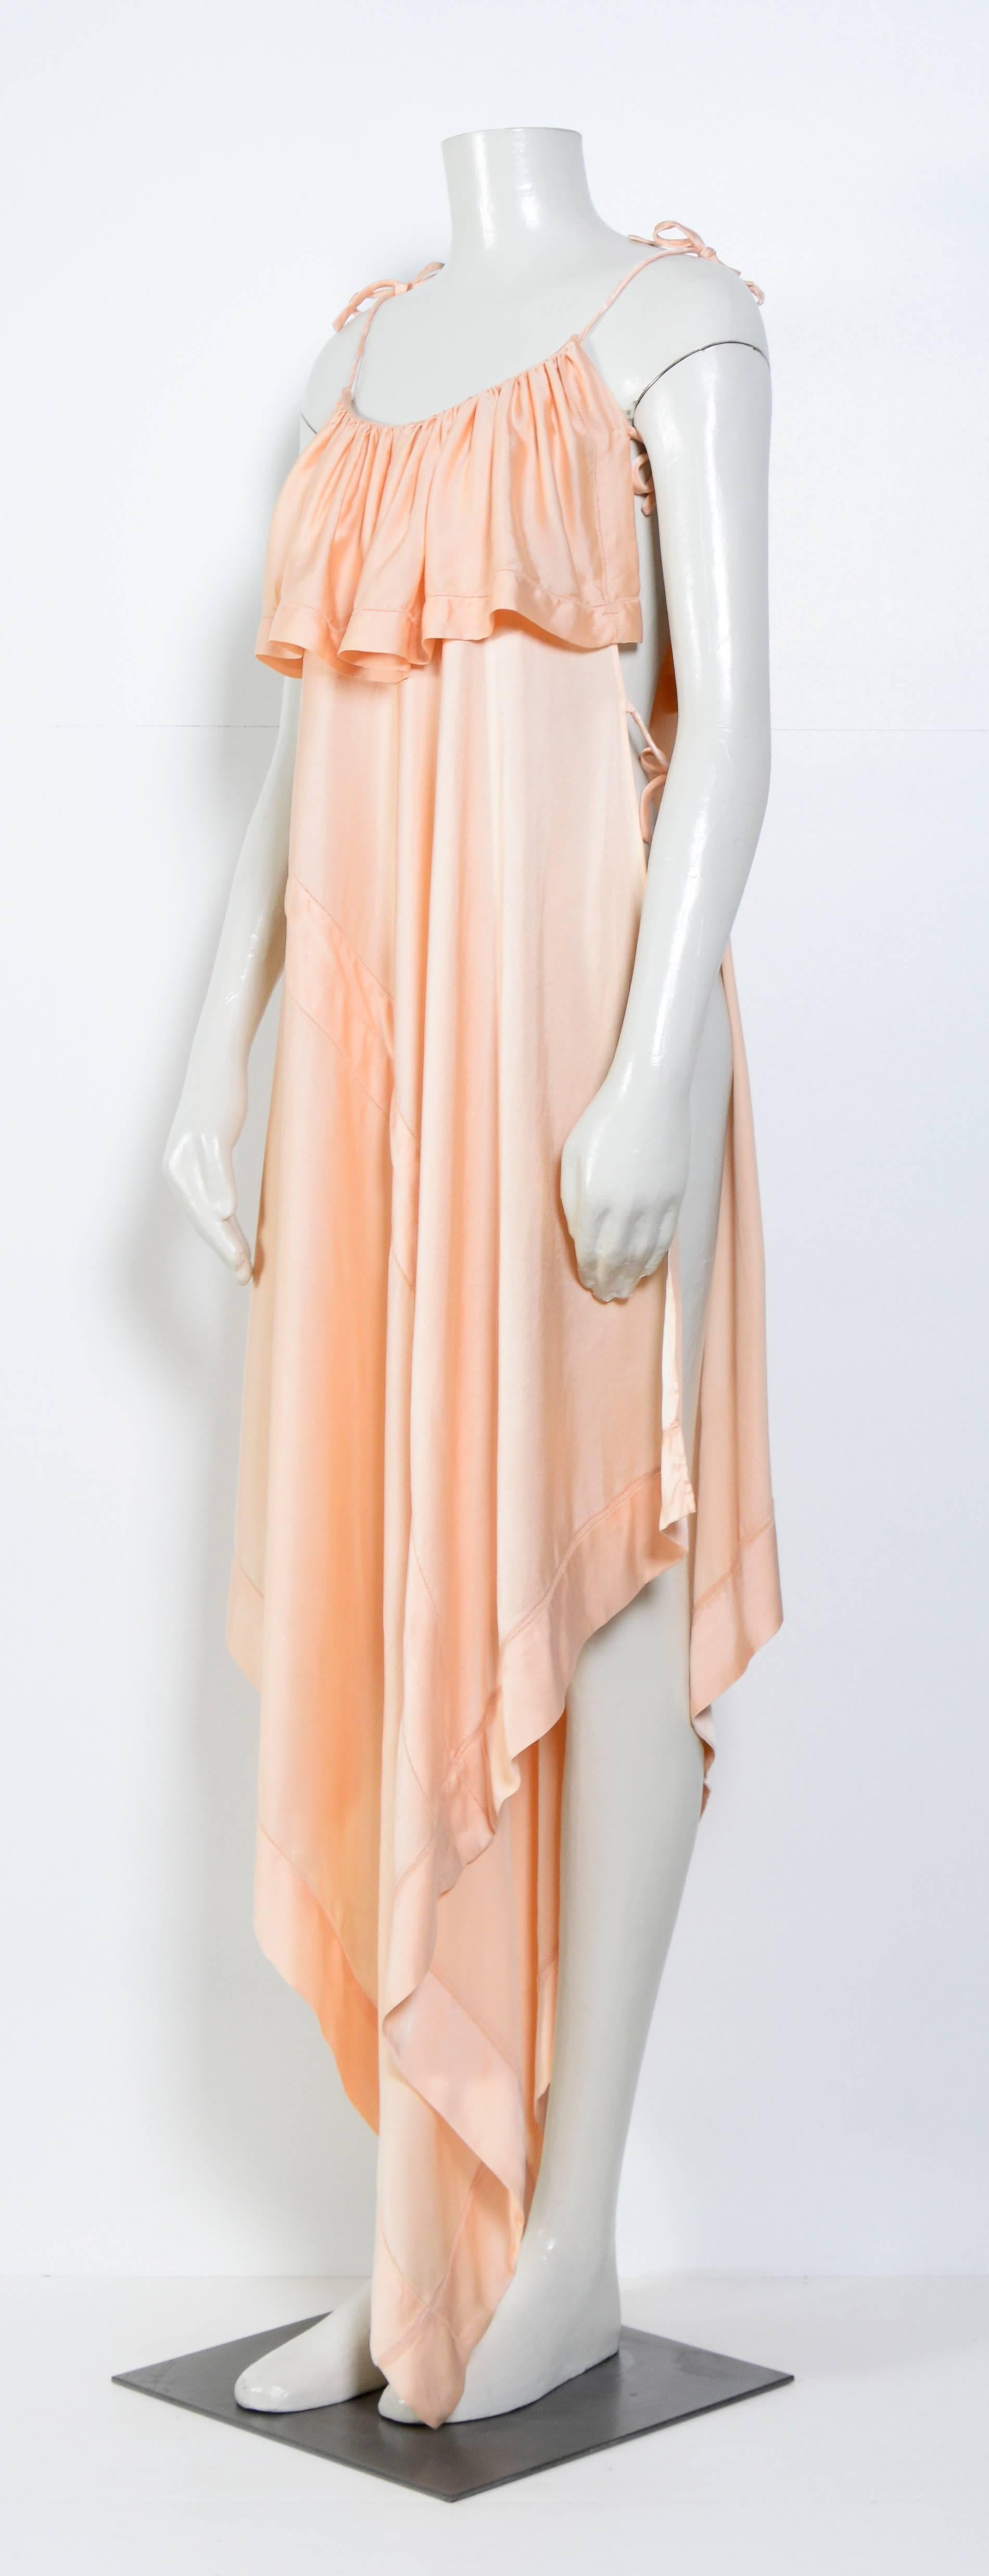 Vintage soft pink silk dress by Angelo Tarlazzi
2 panels attached with strings, open on the side.
Measurements Free
